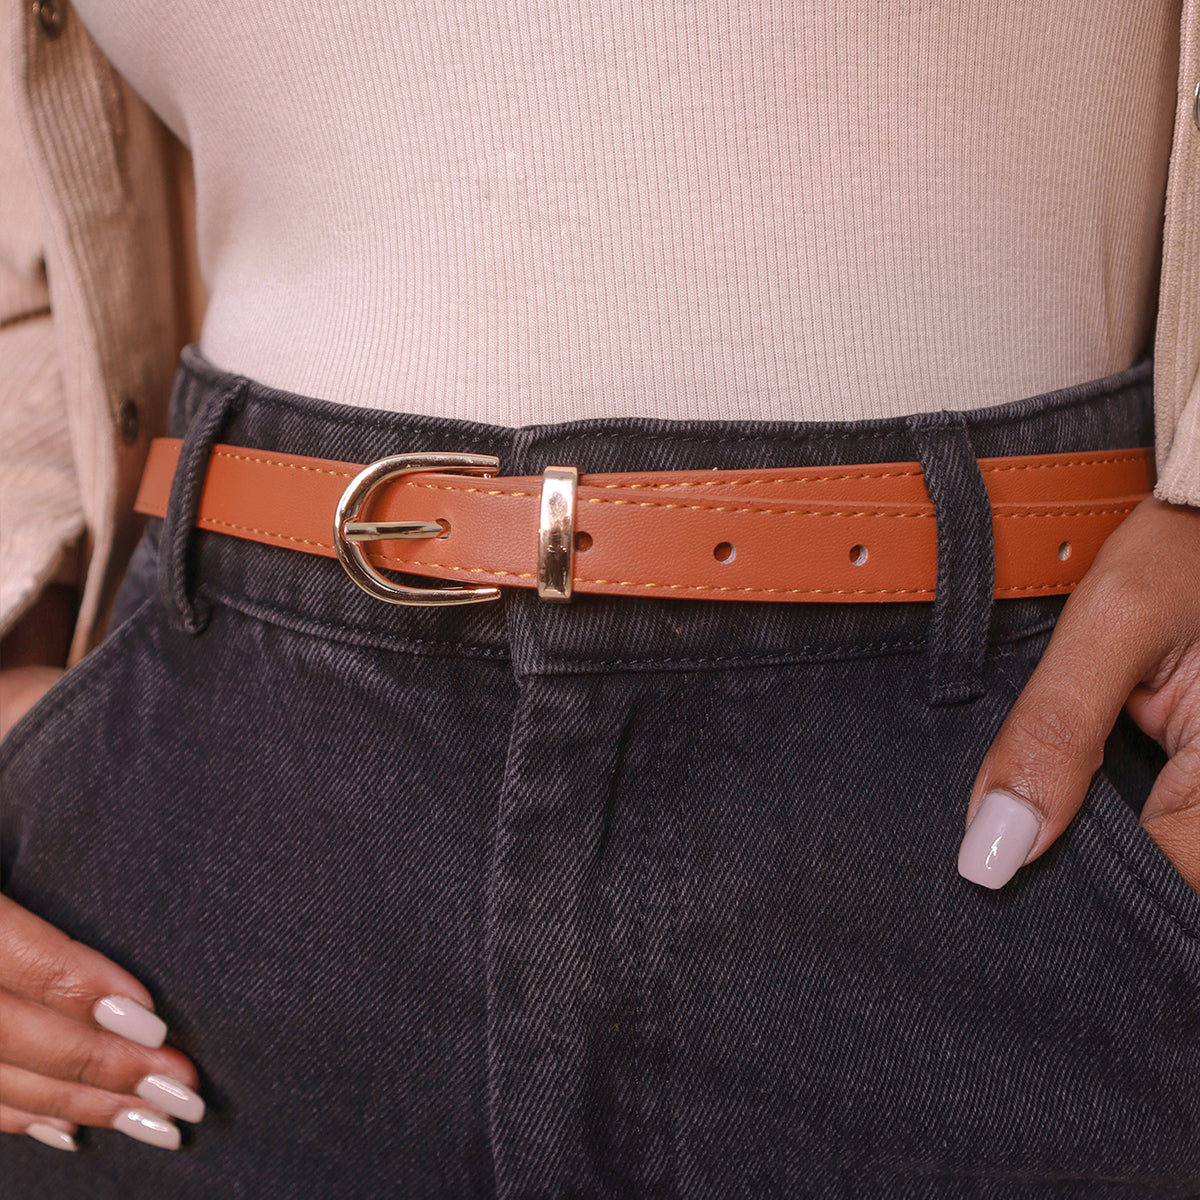 Brown With Gold Tone Thin Belt